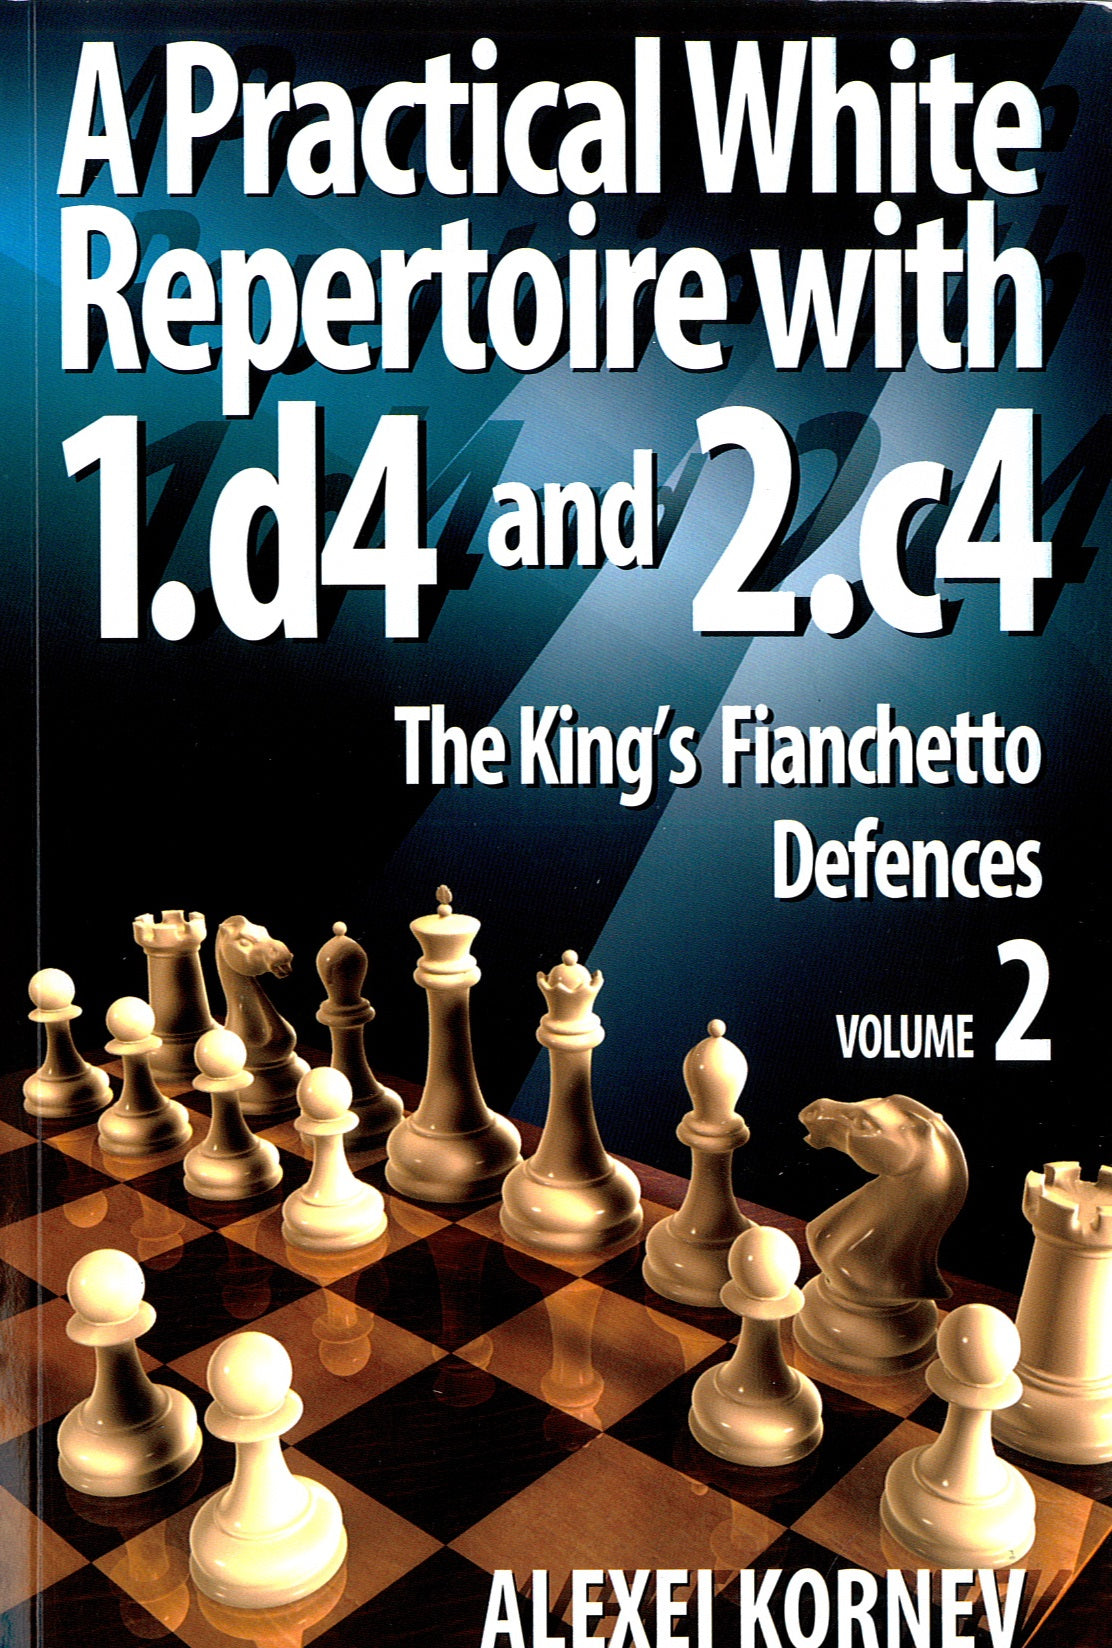 Kornev: A Practical White Repertoire with 1. d4 and 2. c4 - Volume 2